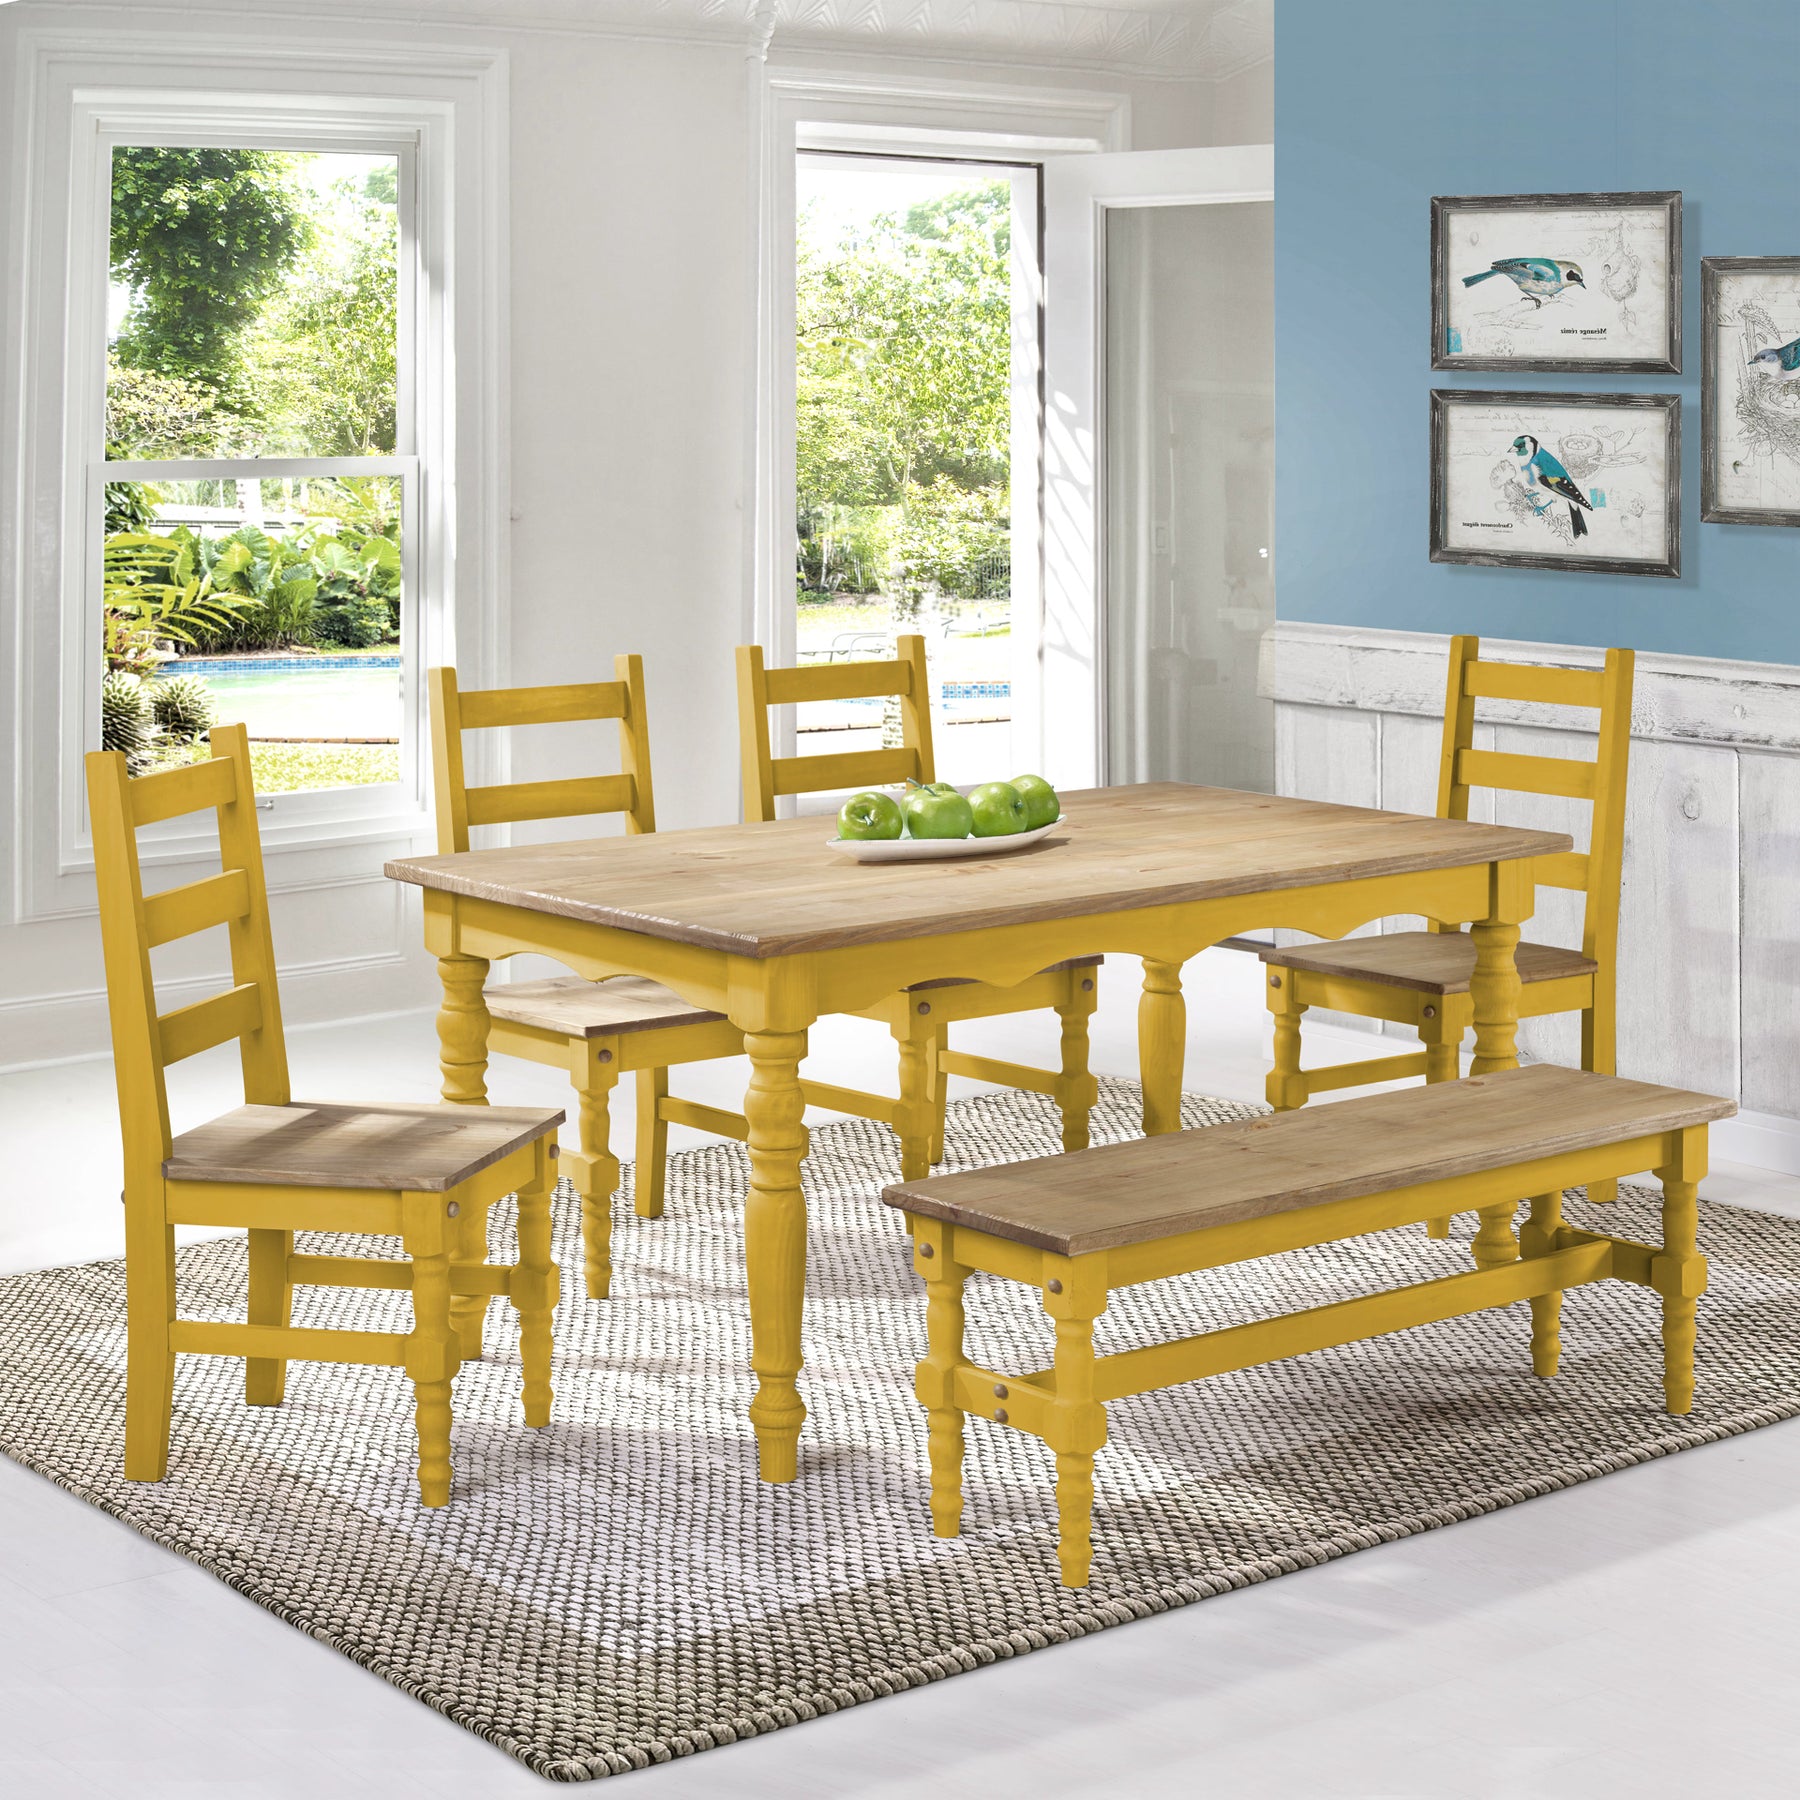 Manhattan Comfort Jay 6-Piece Solid Wood Dining Set with 1 Bench, 4 Chairs, and 1 Table in Yellow Wash-Minimal & Modern